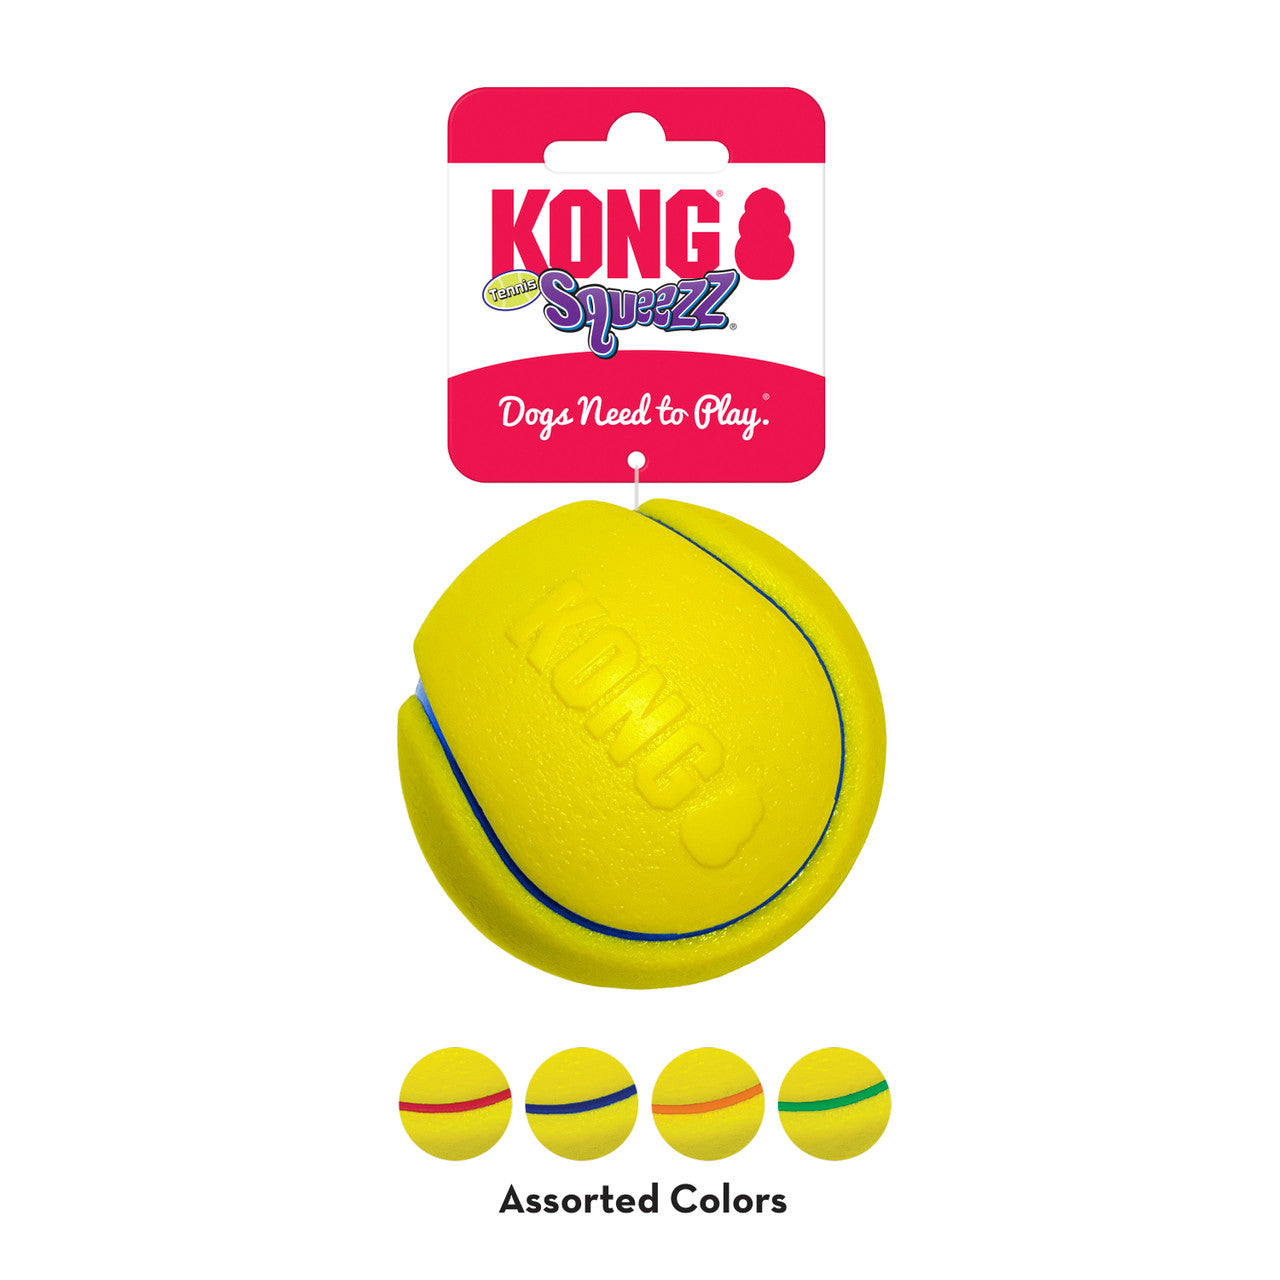 KONG Squeezz Tennis Ball Dog Toy LG